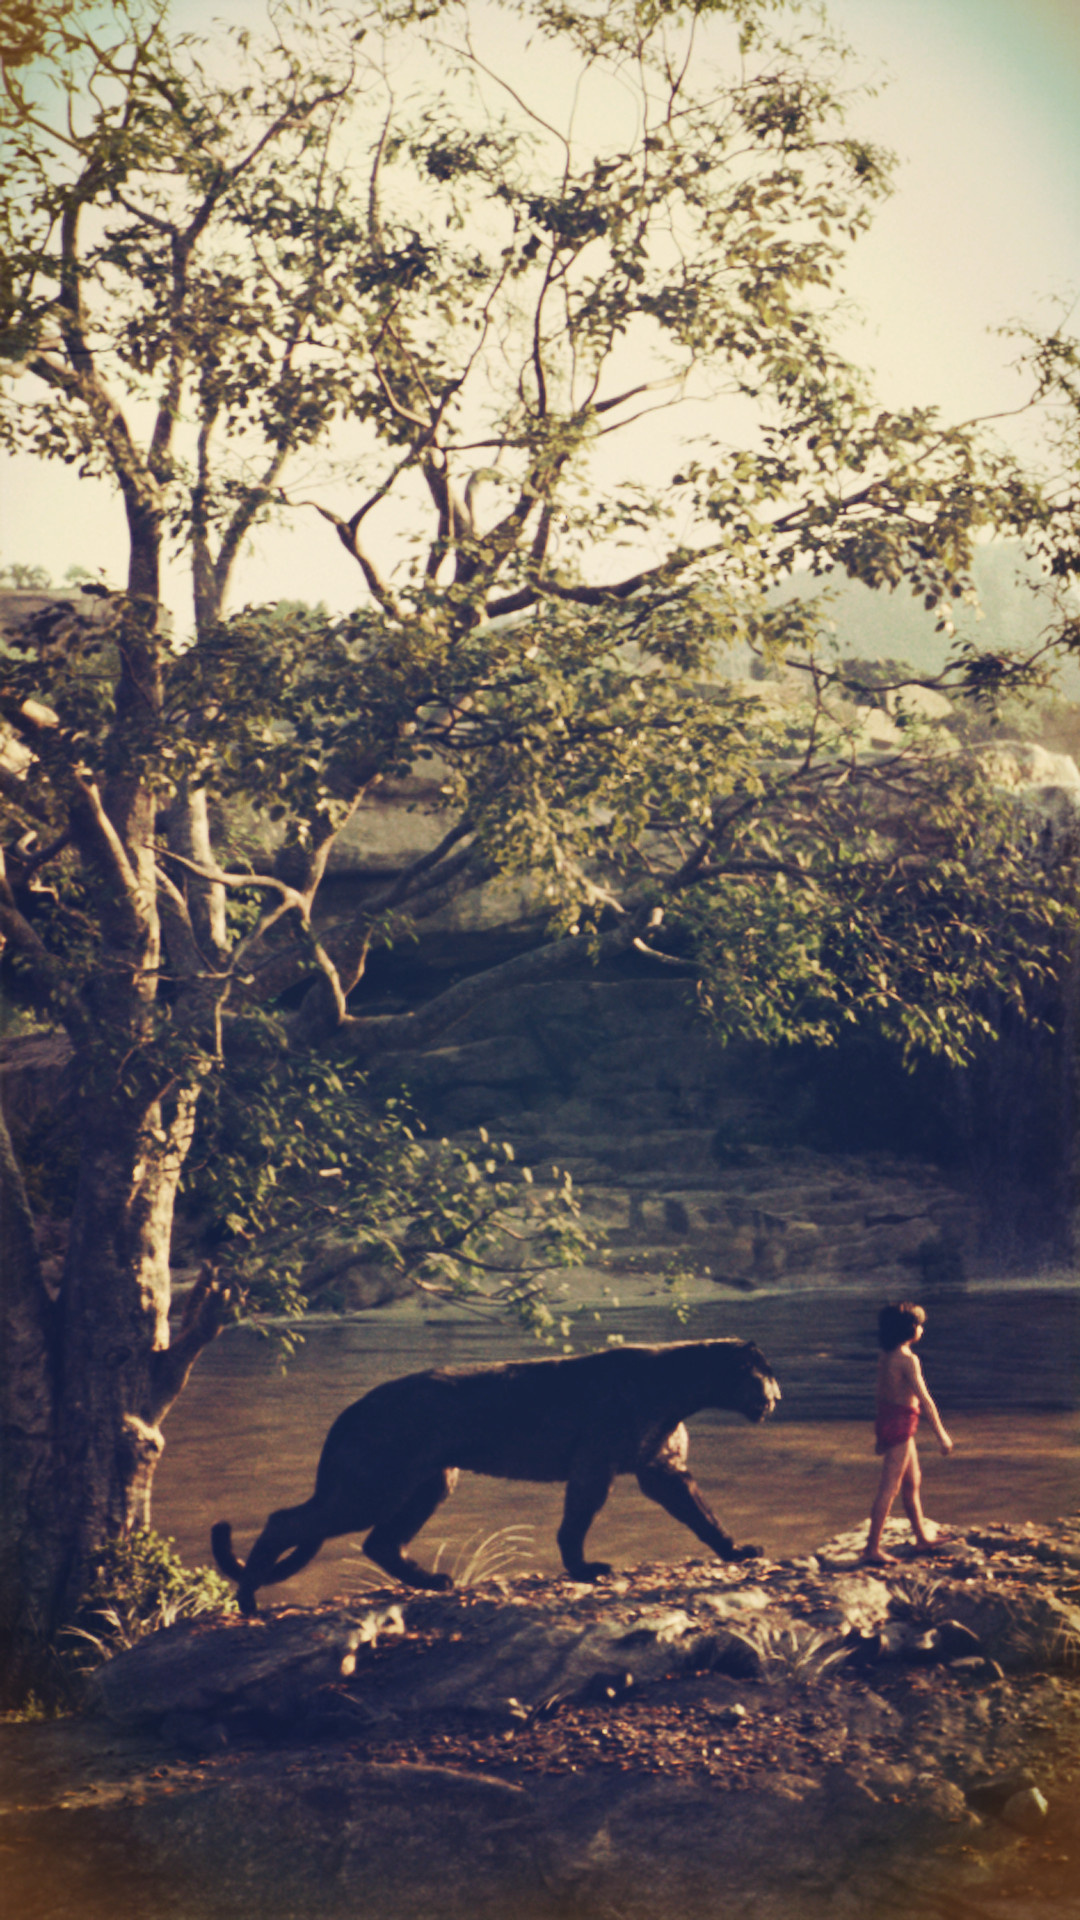 The Jungle Book movie, Inspiring wallpapers, Lively jungle, Breathtaking beauty, 1080x1920 Full HD Handy